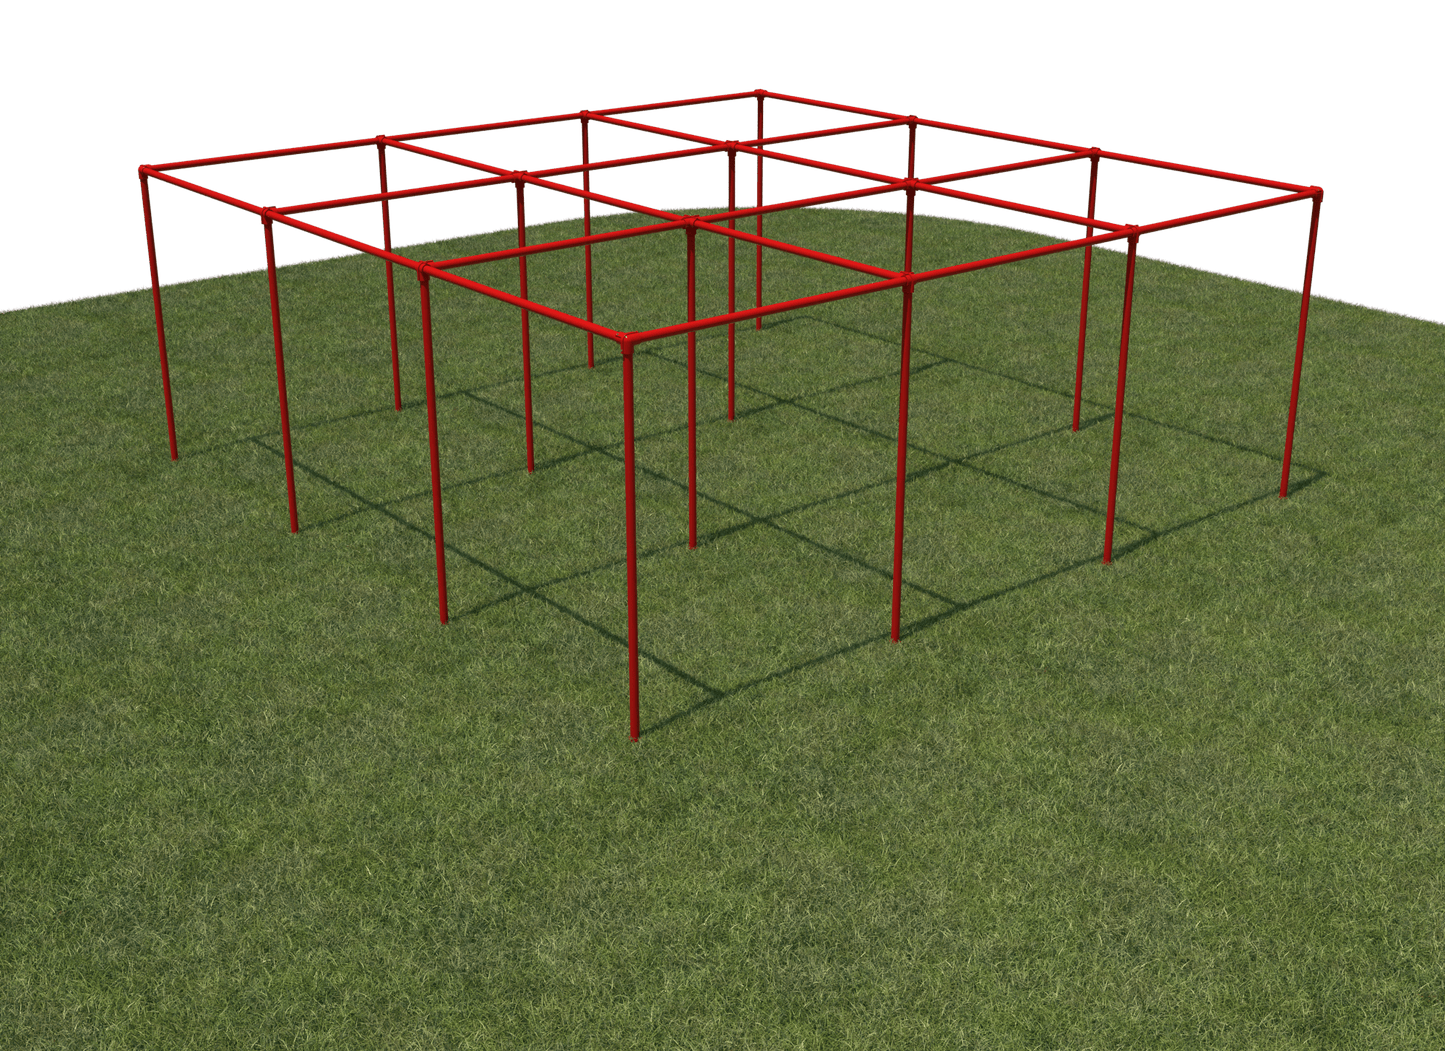 9 Square in the Air: Playground Edition